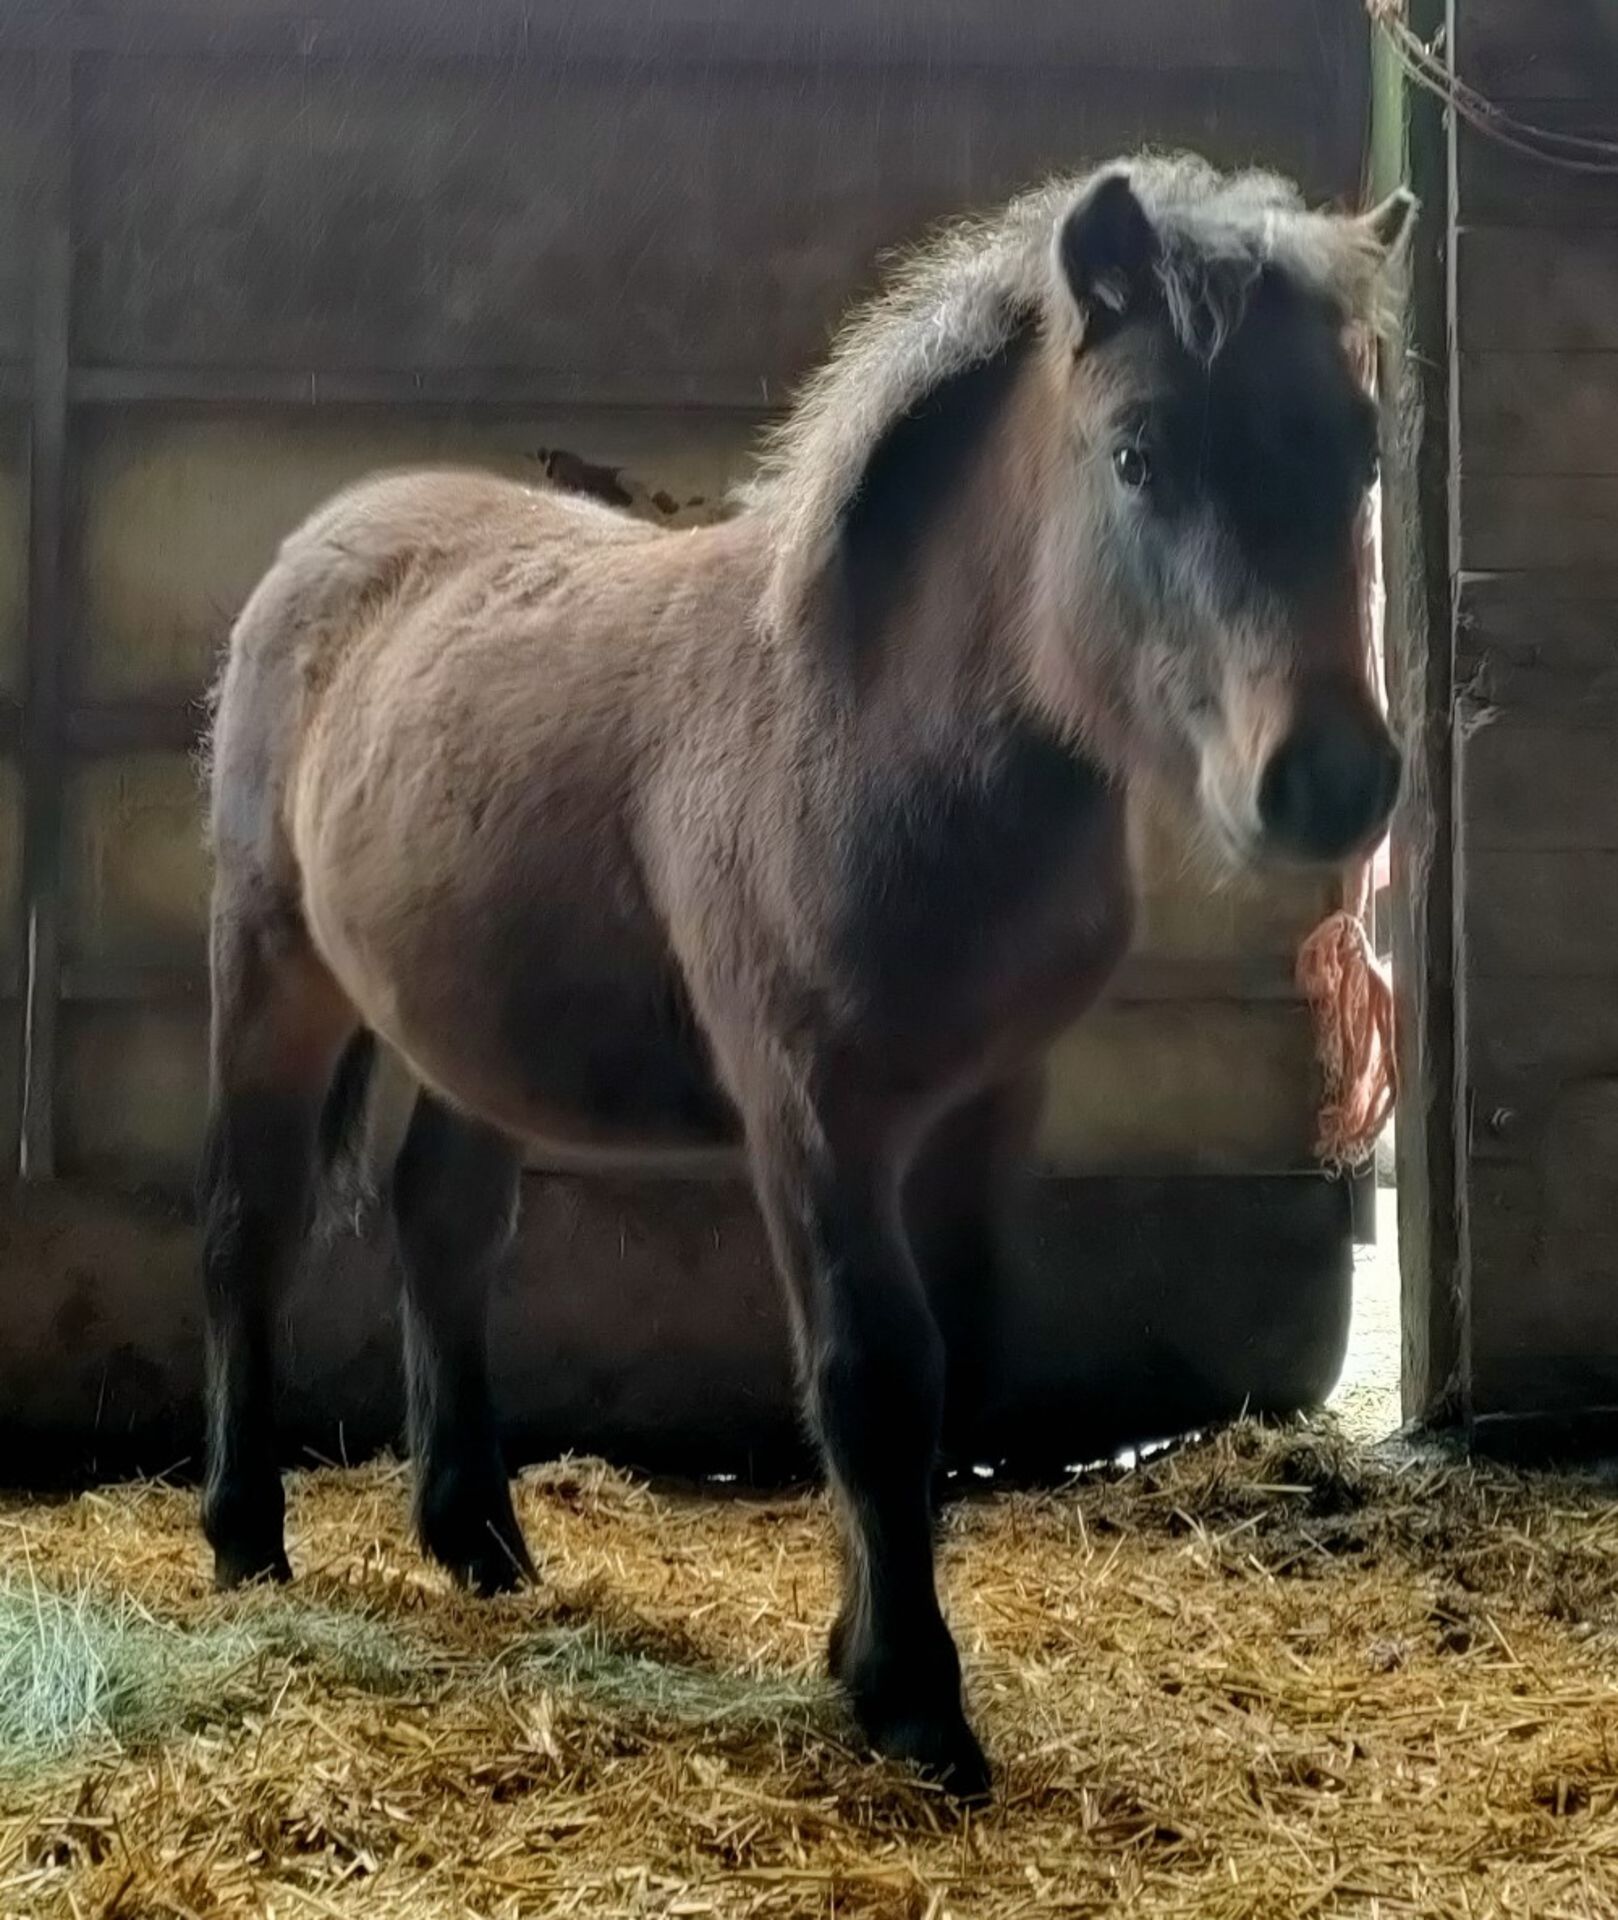 'VIXEN QUEEN'S PROTECTOR' SHETLAND X BAY COLT APPROX 6 MONTHS OLD - Image 4 of 7